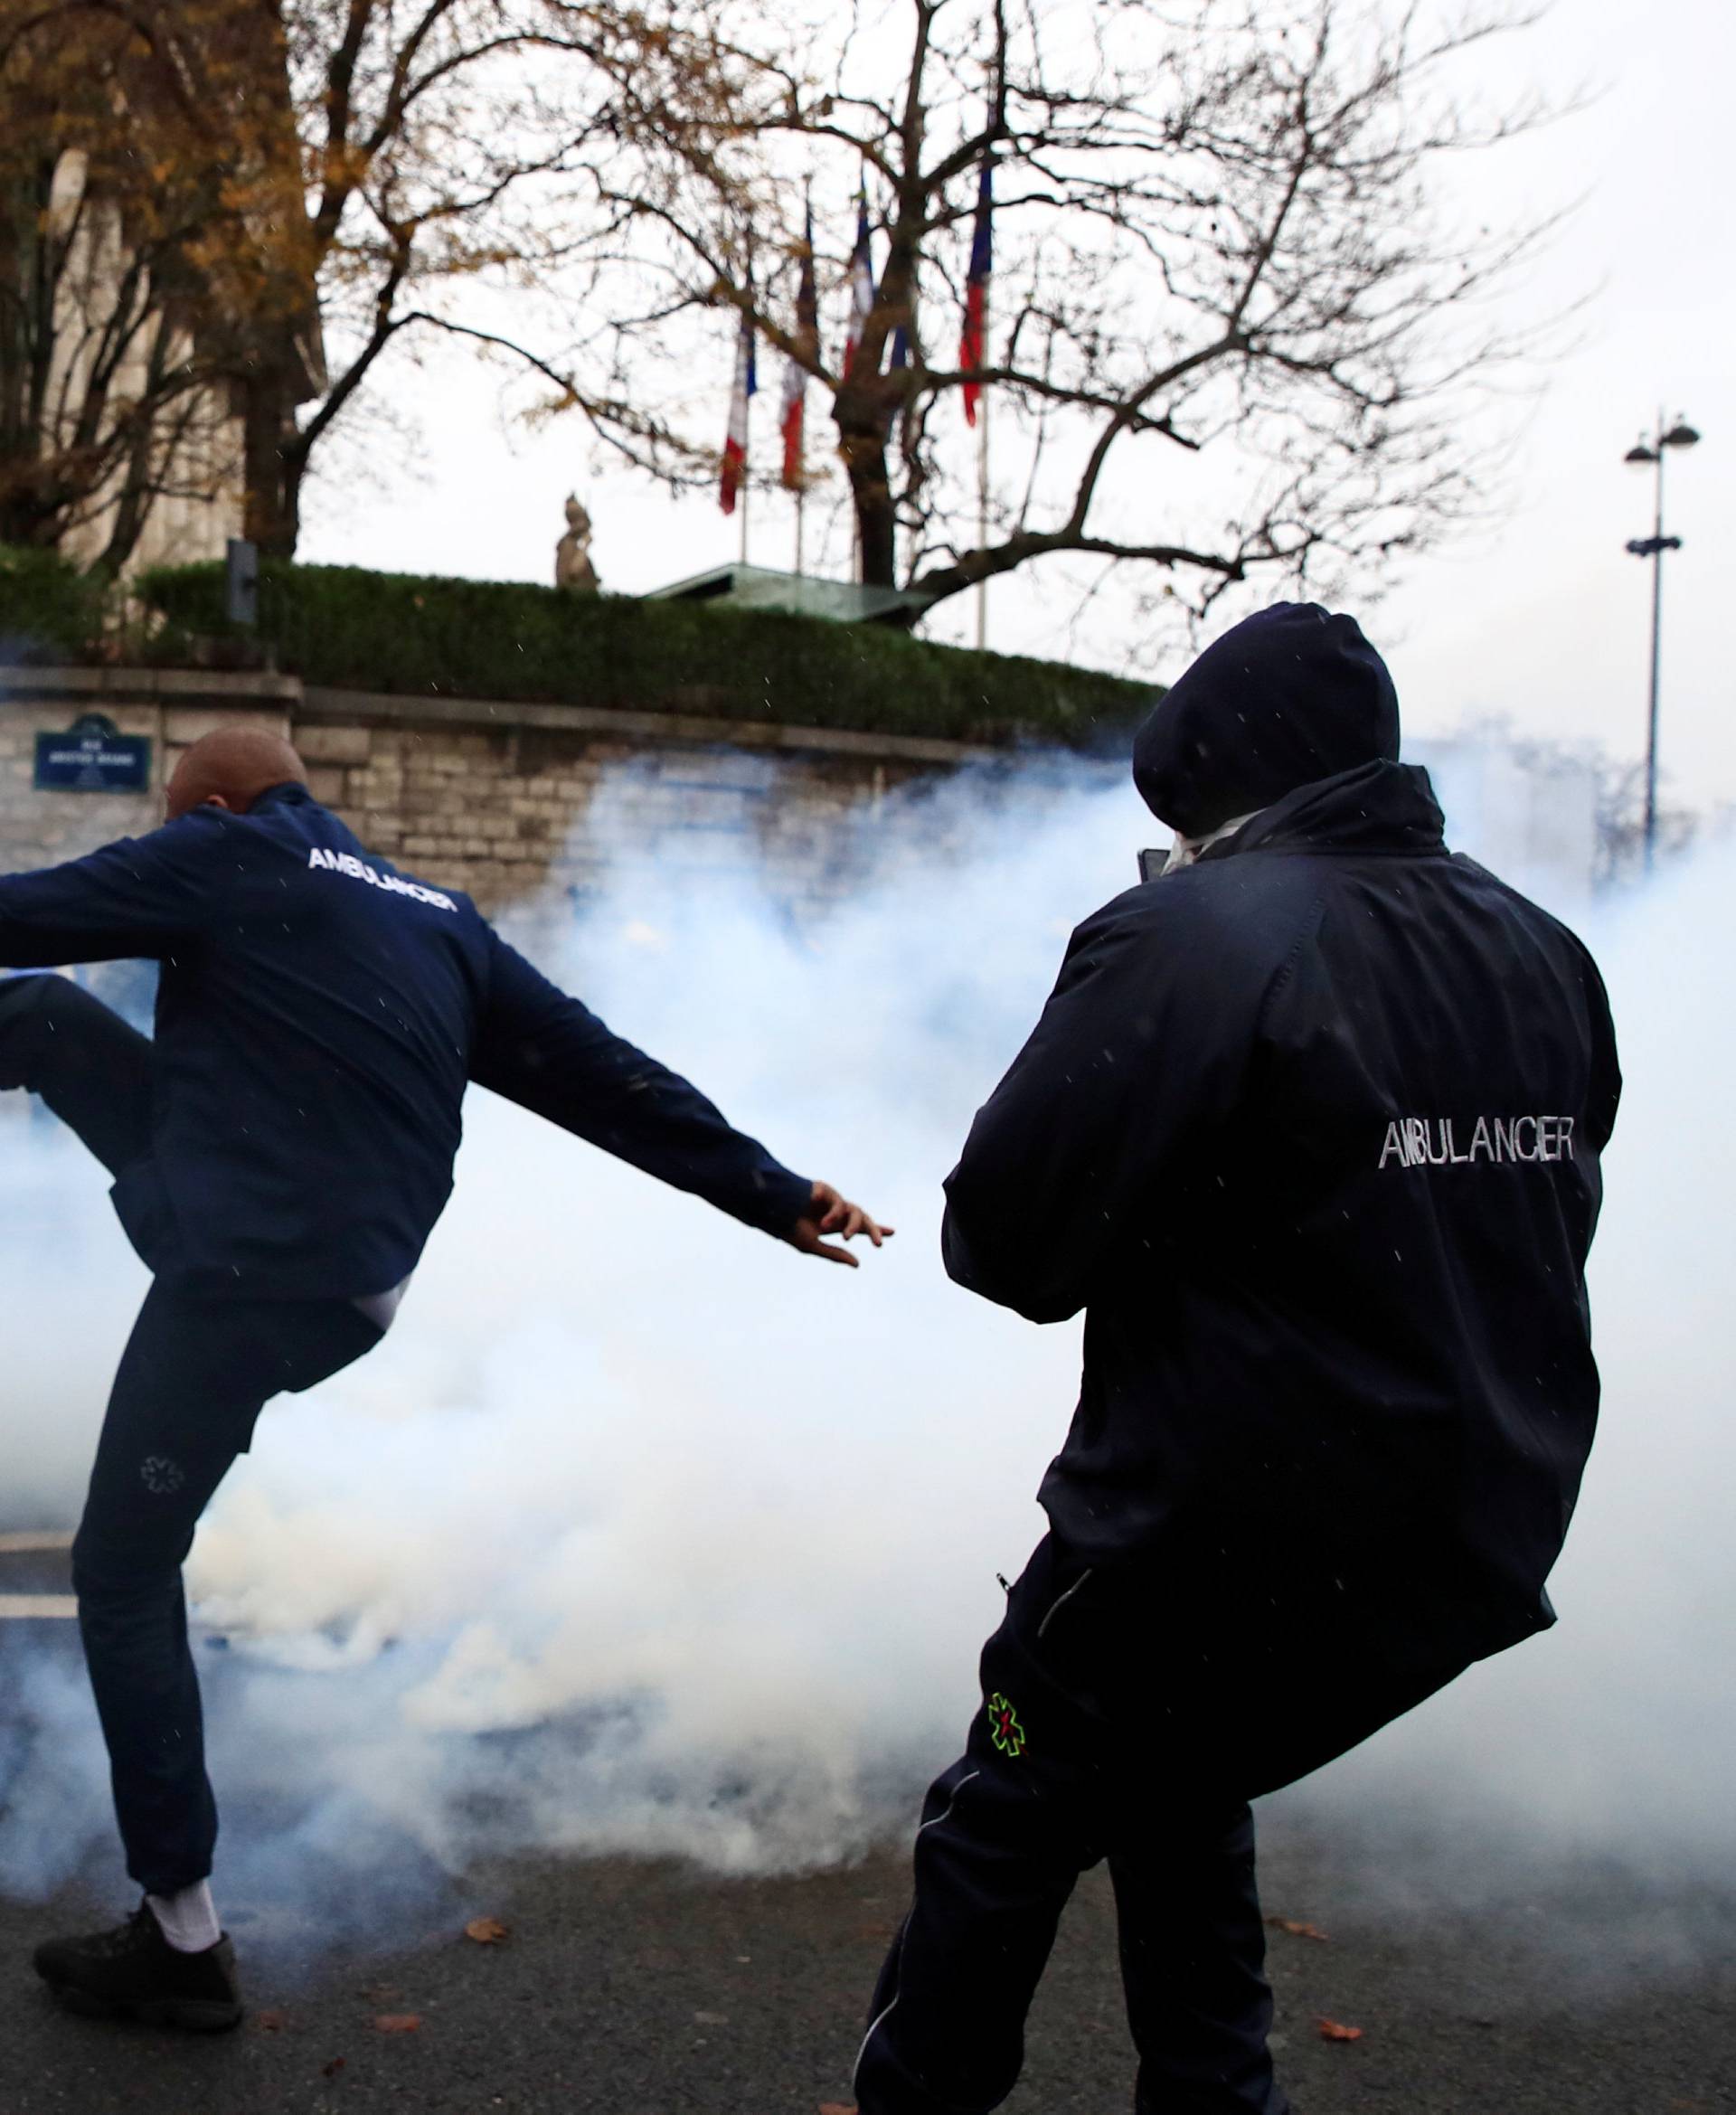 French ambulance drivers face off with French riot police during a demonstration at the Place de la Concorde in Paris